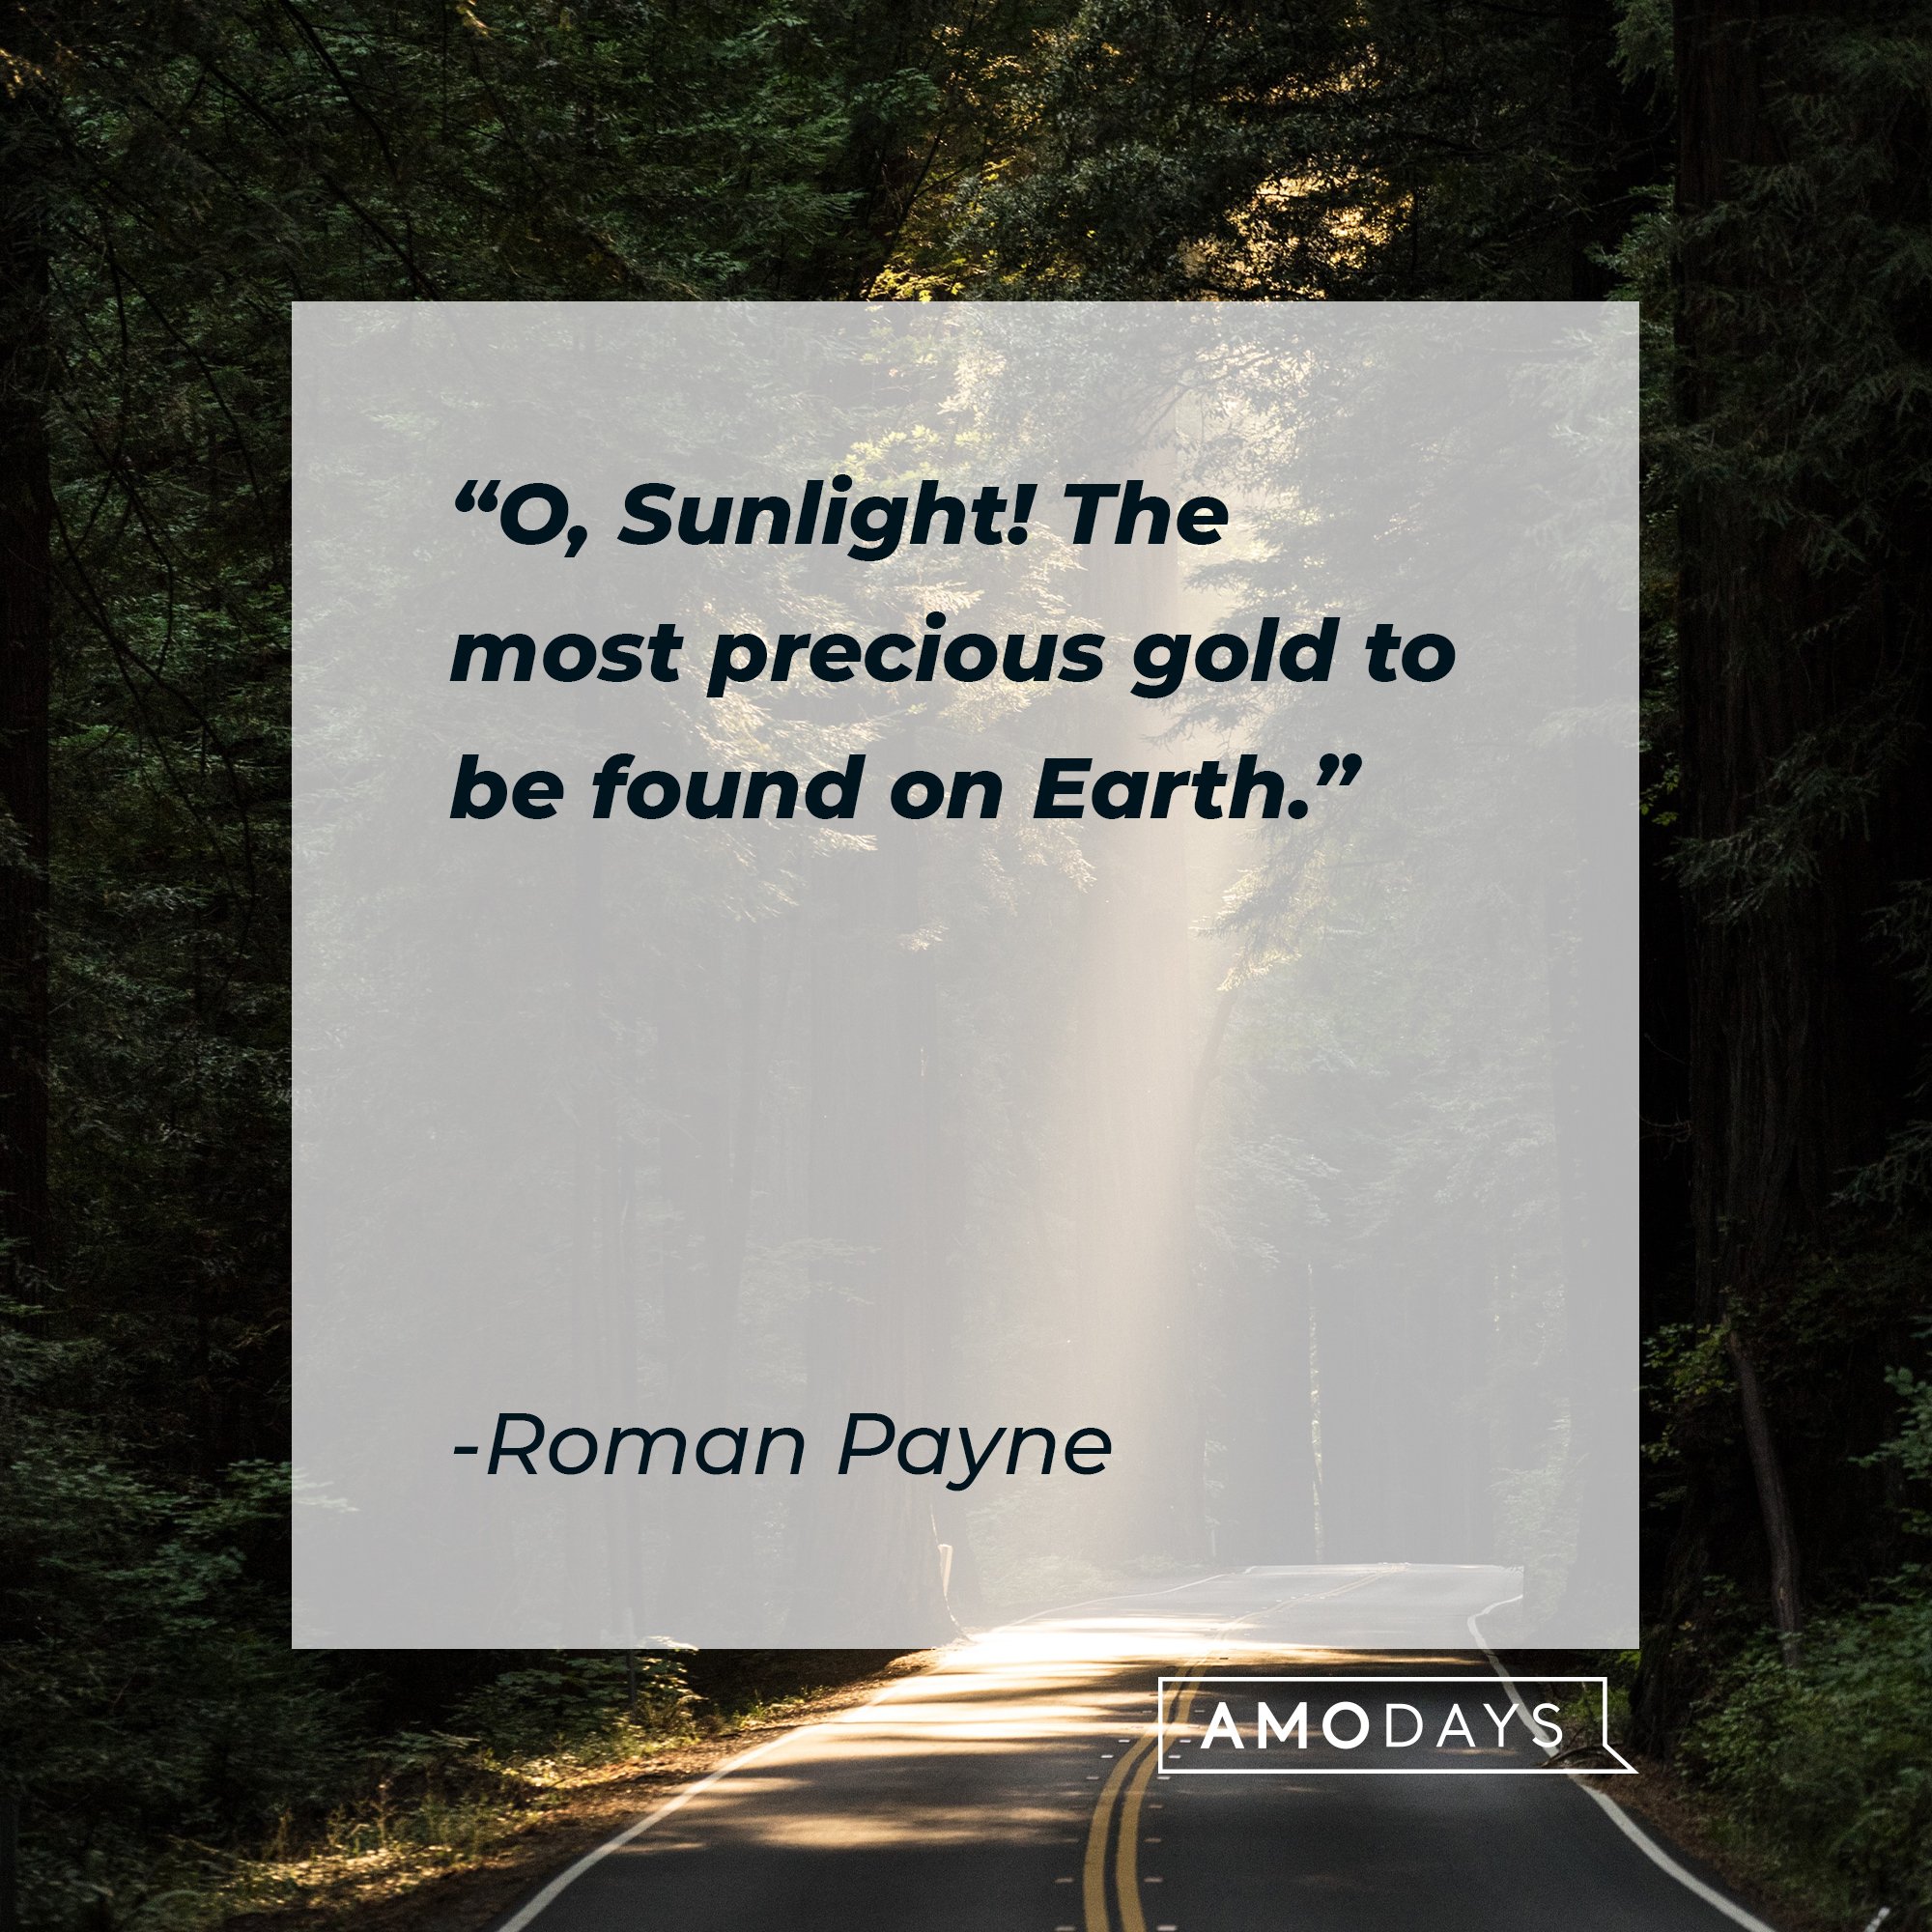  Roman Payne’s quote: "Ô, Sunlight! The most precious gold to be found on Earth." | Image: AmoDays 